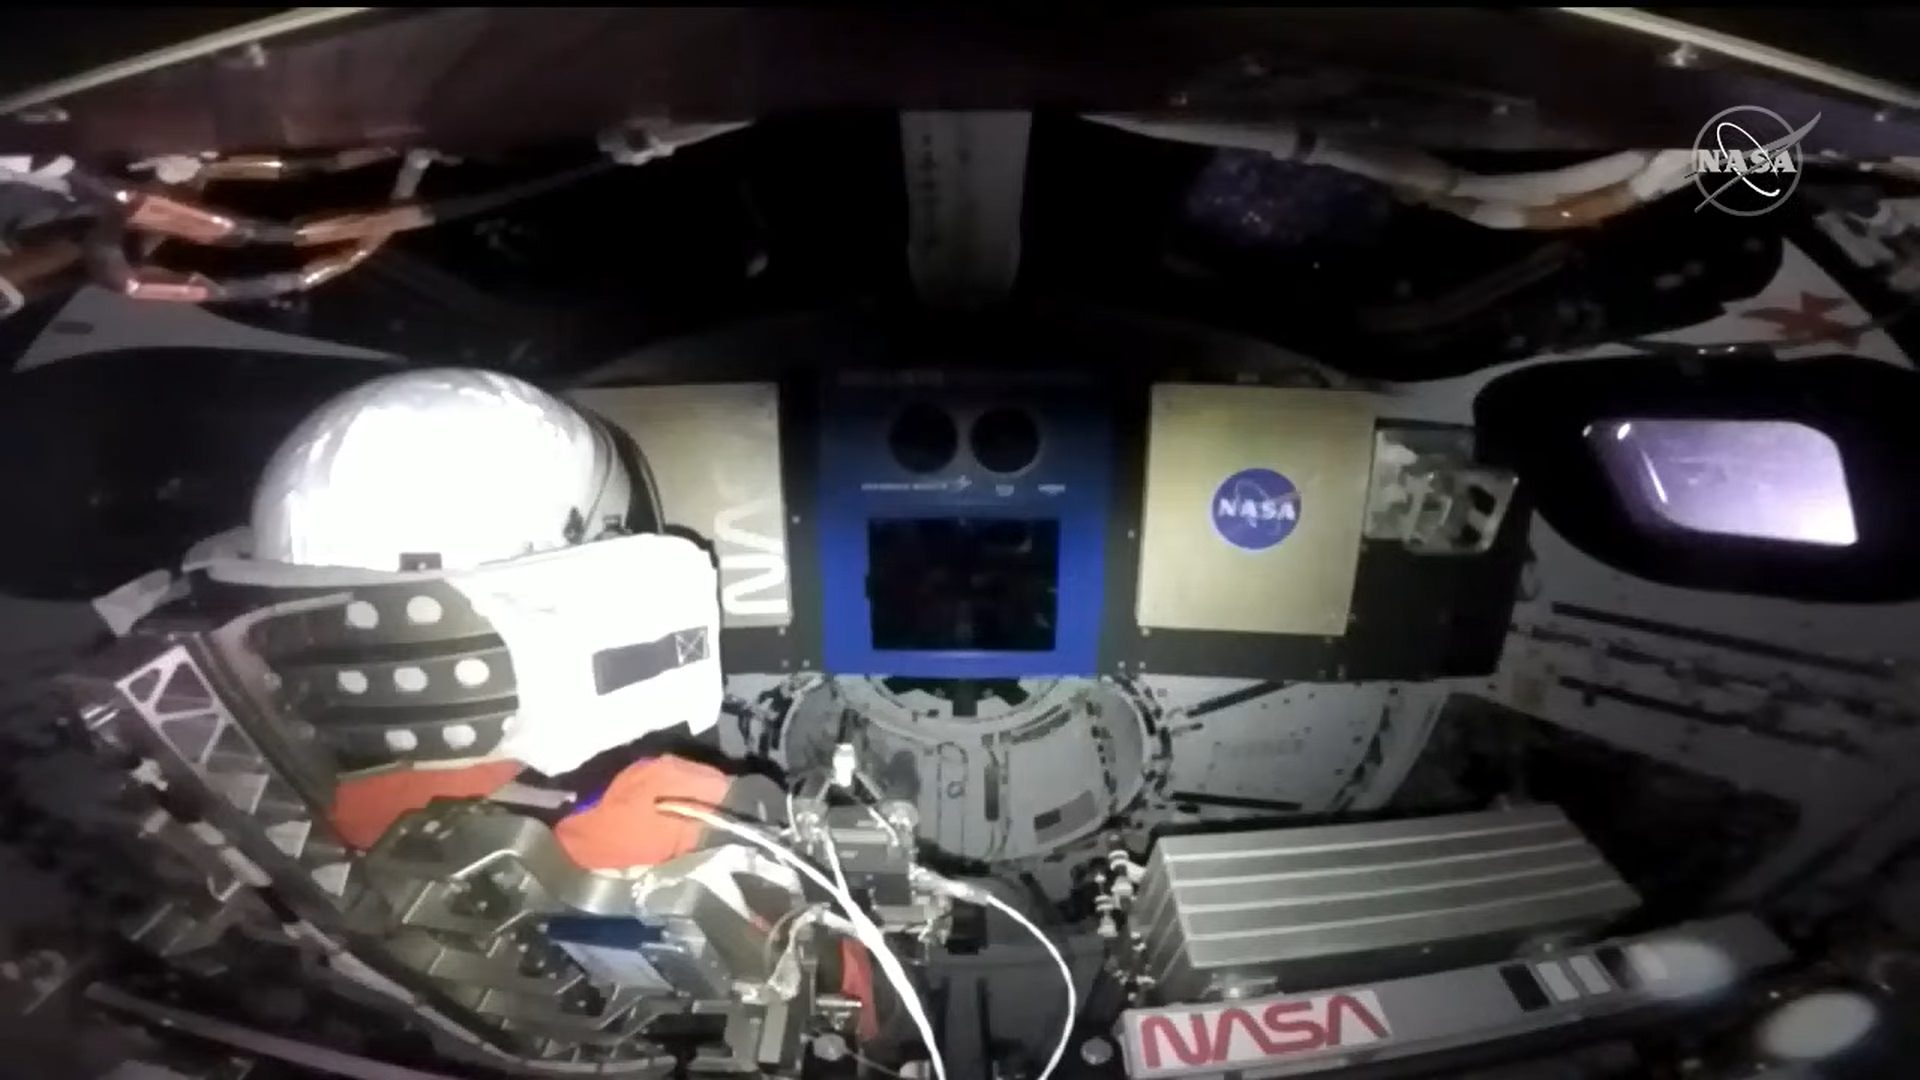 The interior of the Orion spacecraft